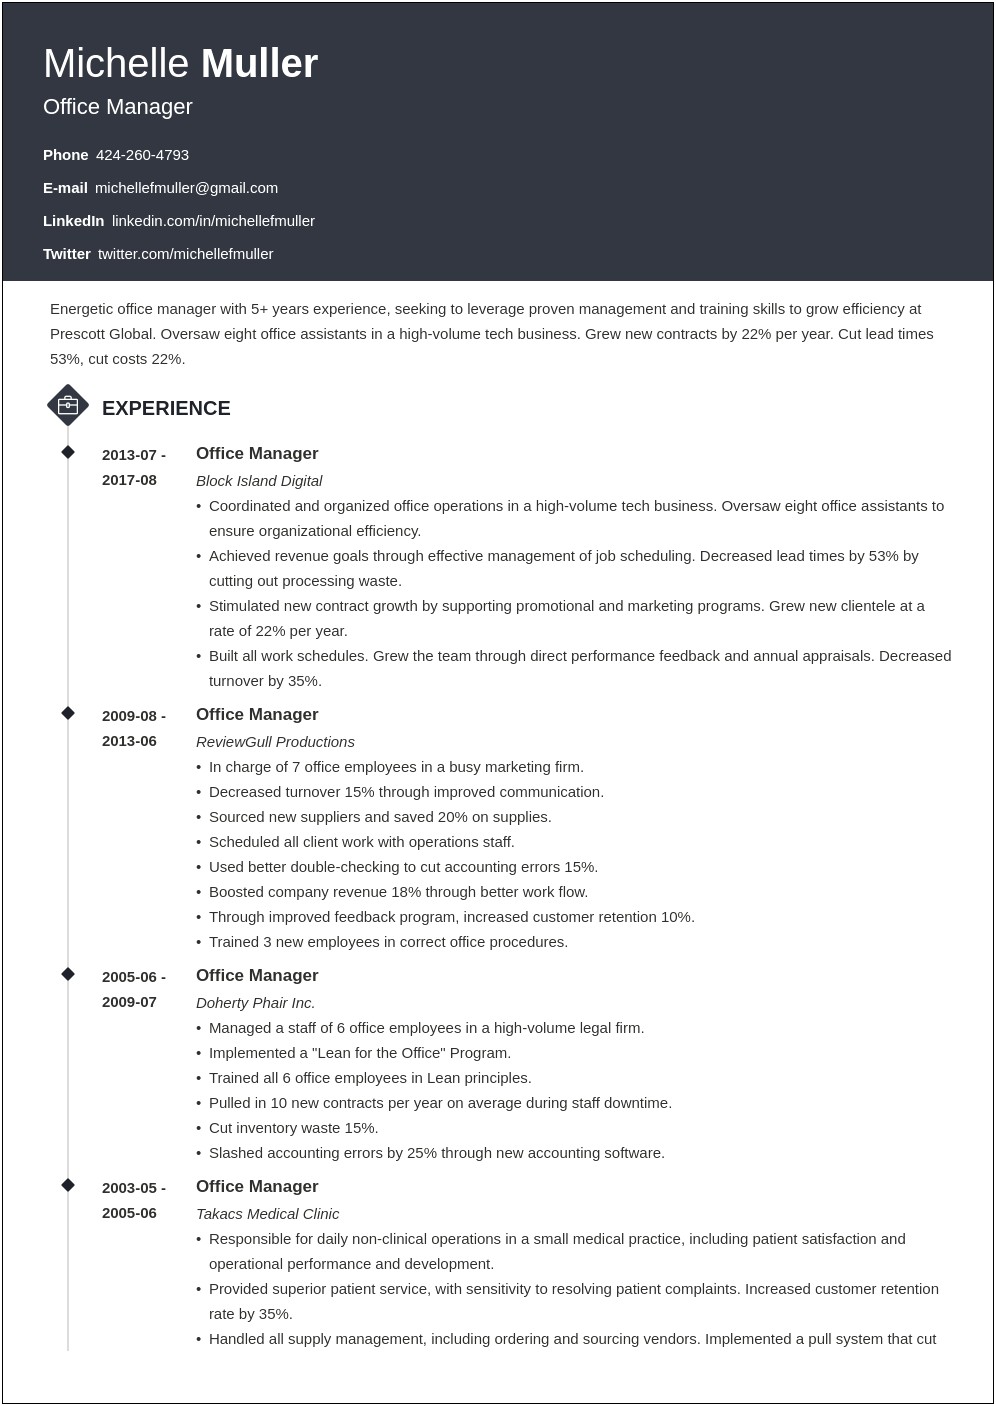 Should I Remove Irrelevant Experience From Resume